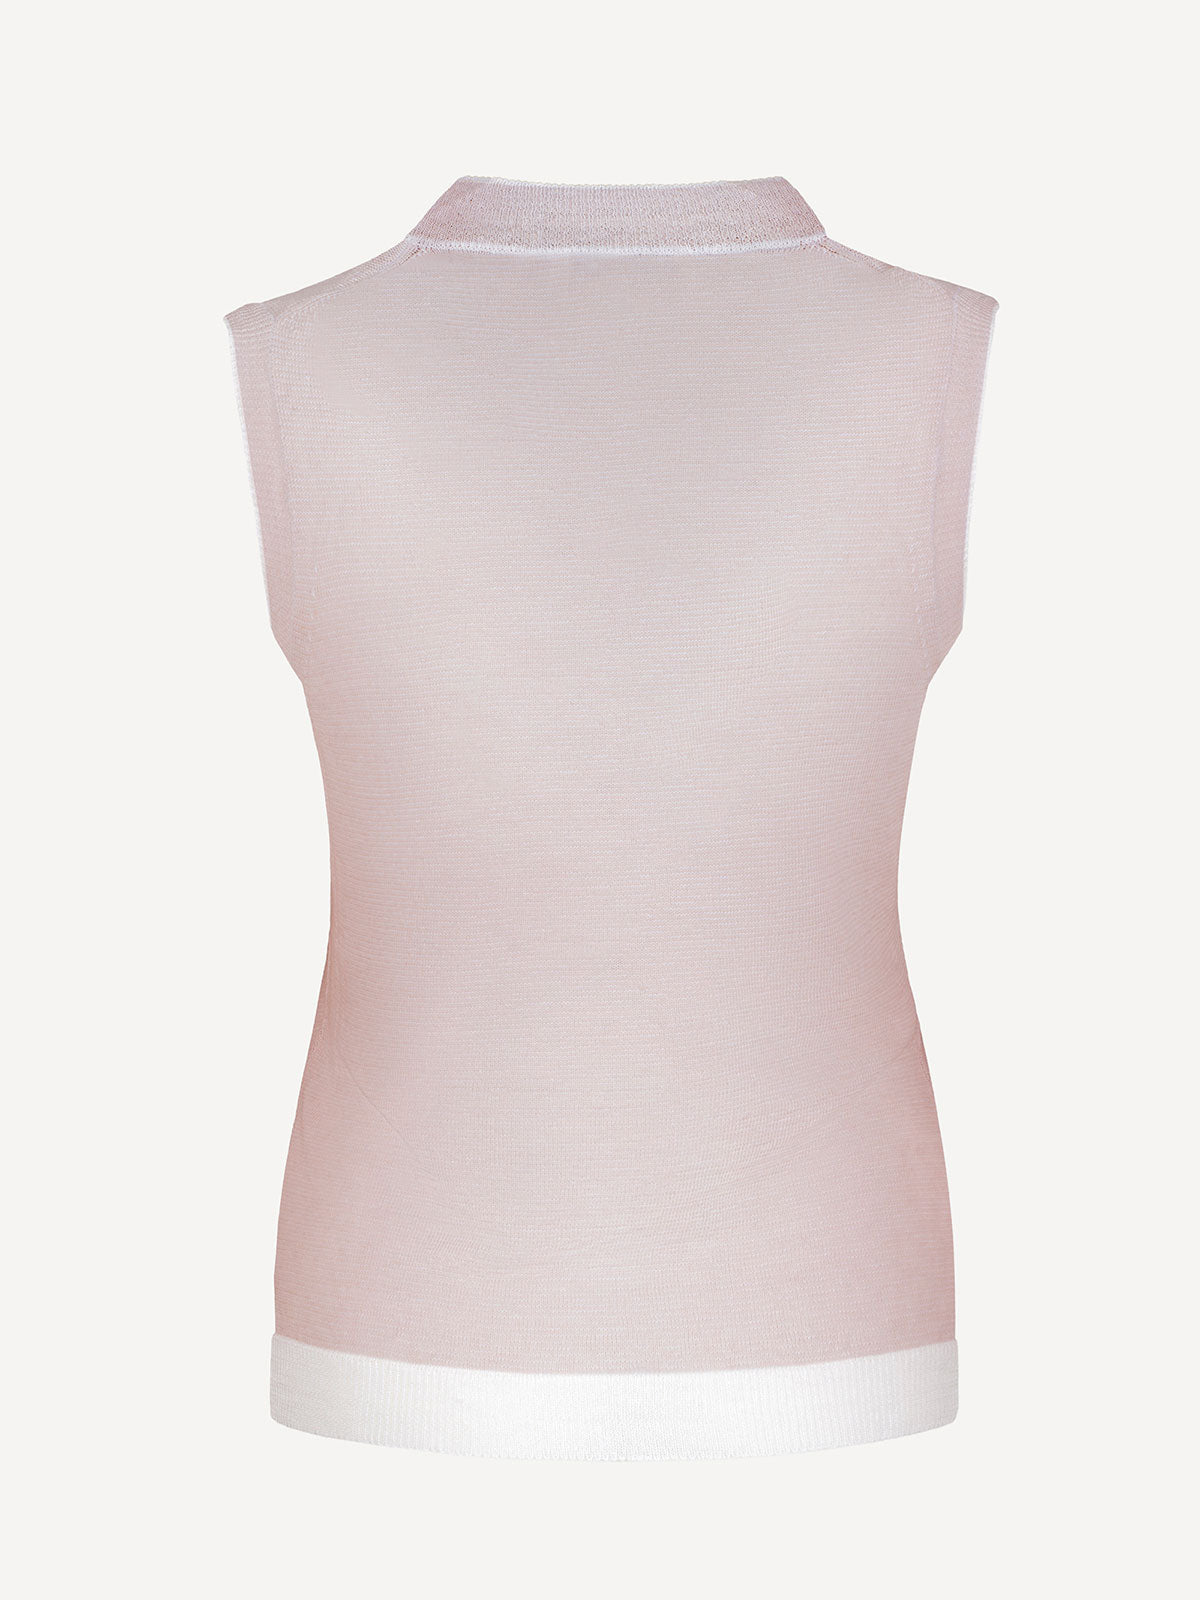 Top St Barth 100 Capri pink and white linen top back